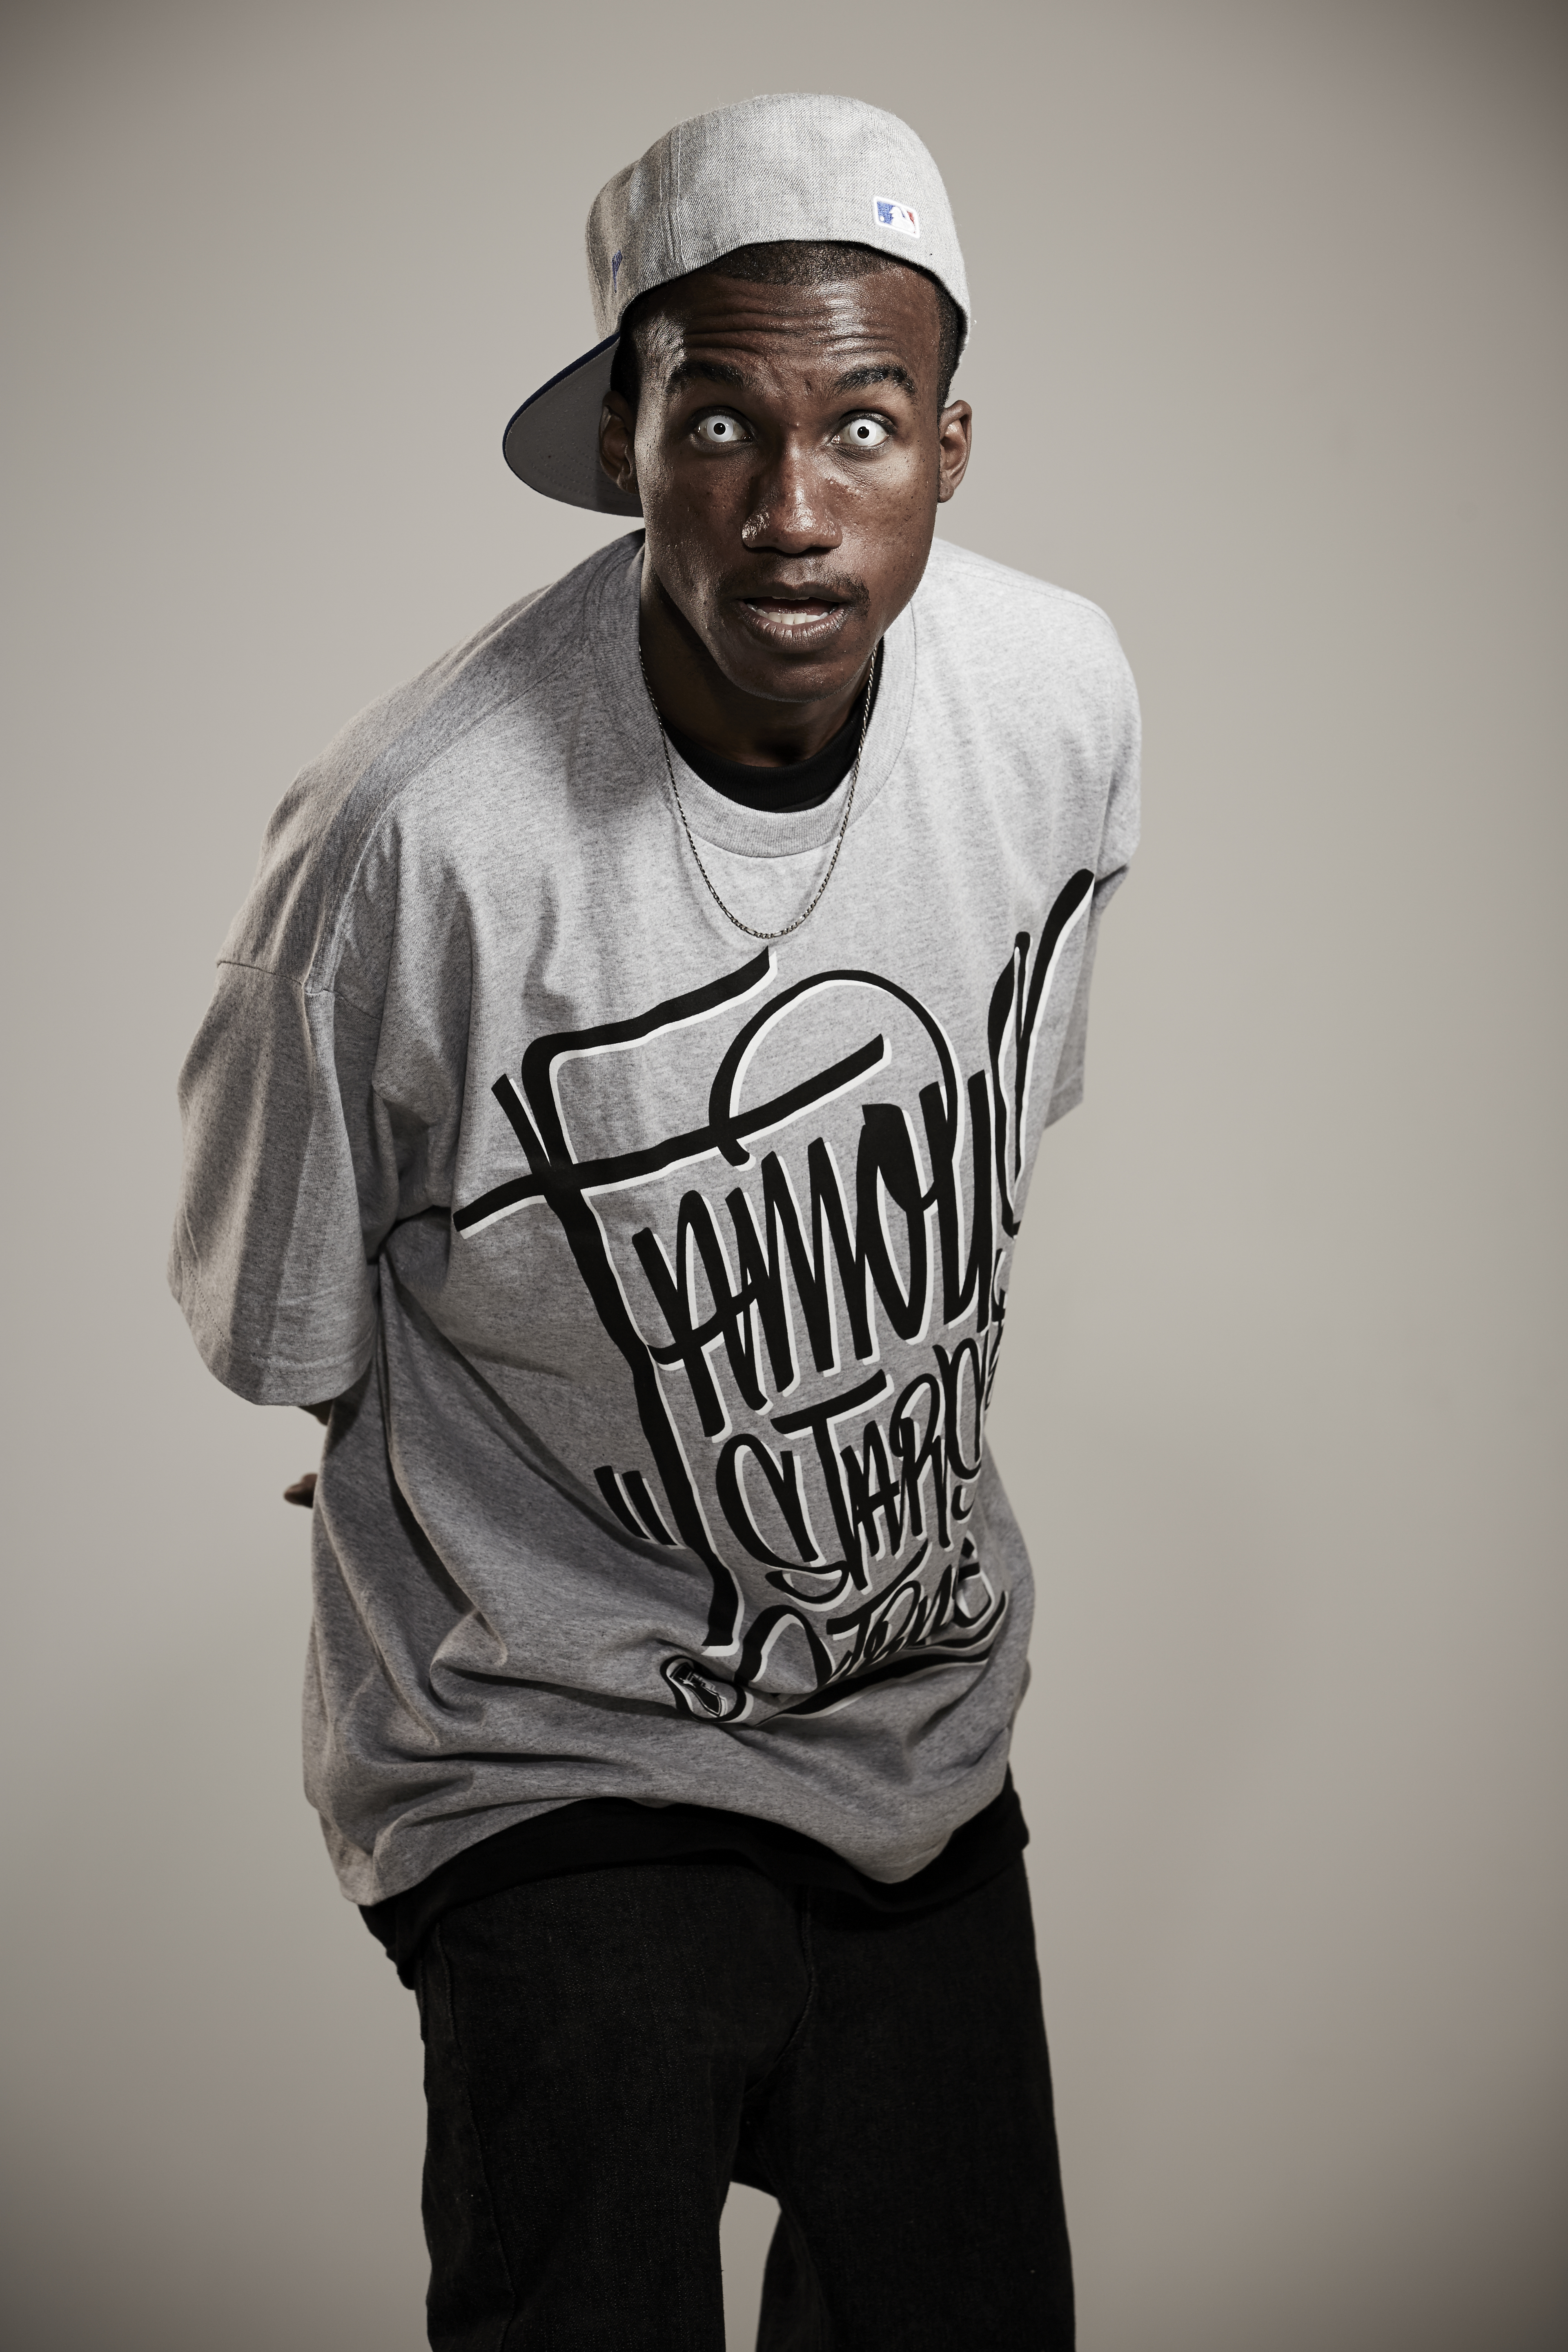 Hopsin wallpapers, Music, HQ Hopsin pictures 4K Wallpapers 2019